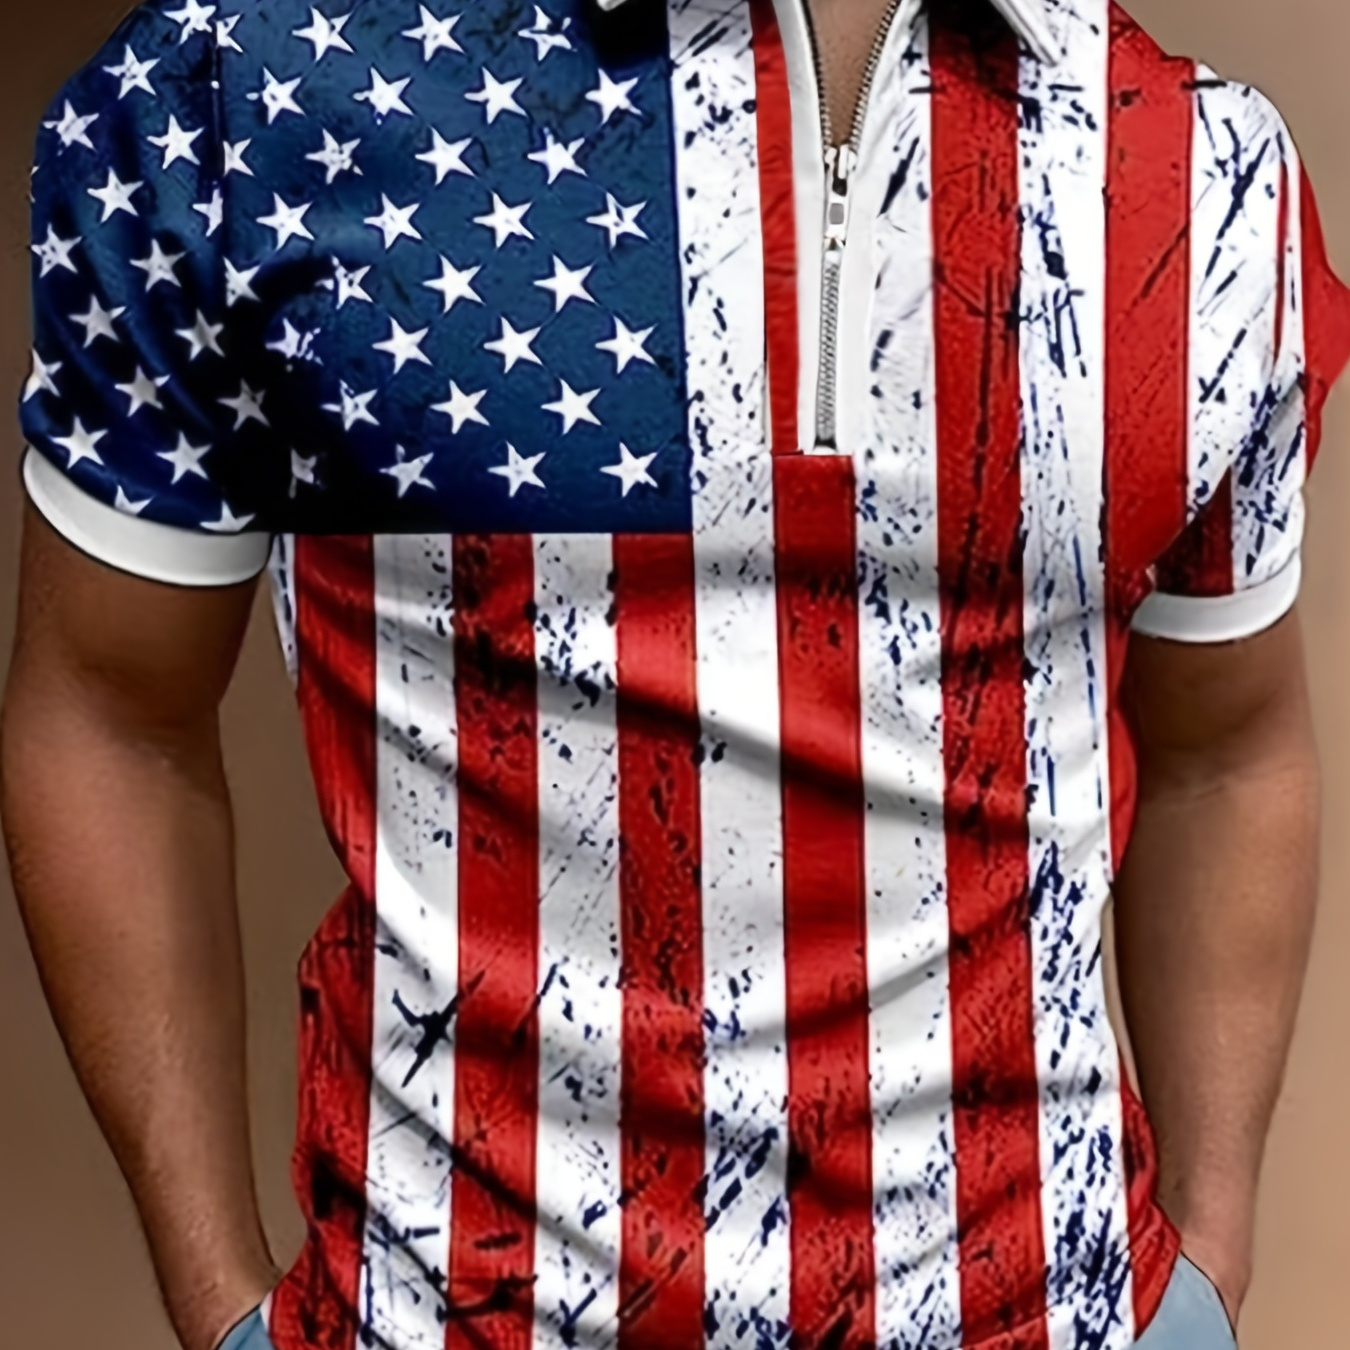 

American Flag Pattern Print Men's Casual Short Sleeves Zip Up Graphic Shirts, Lapel Collar Tops Pullovers, Men's Clothing For Summer